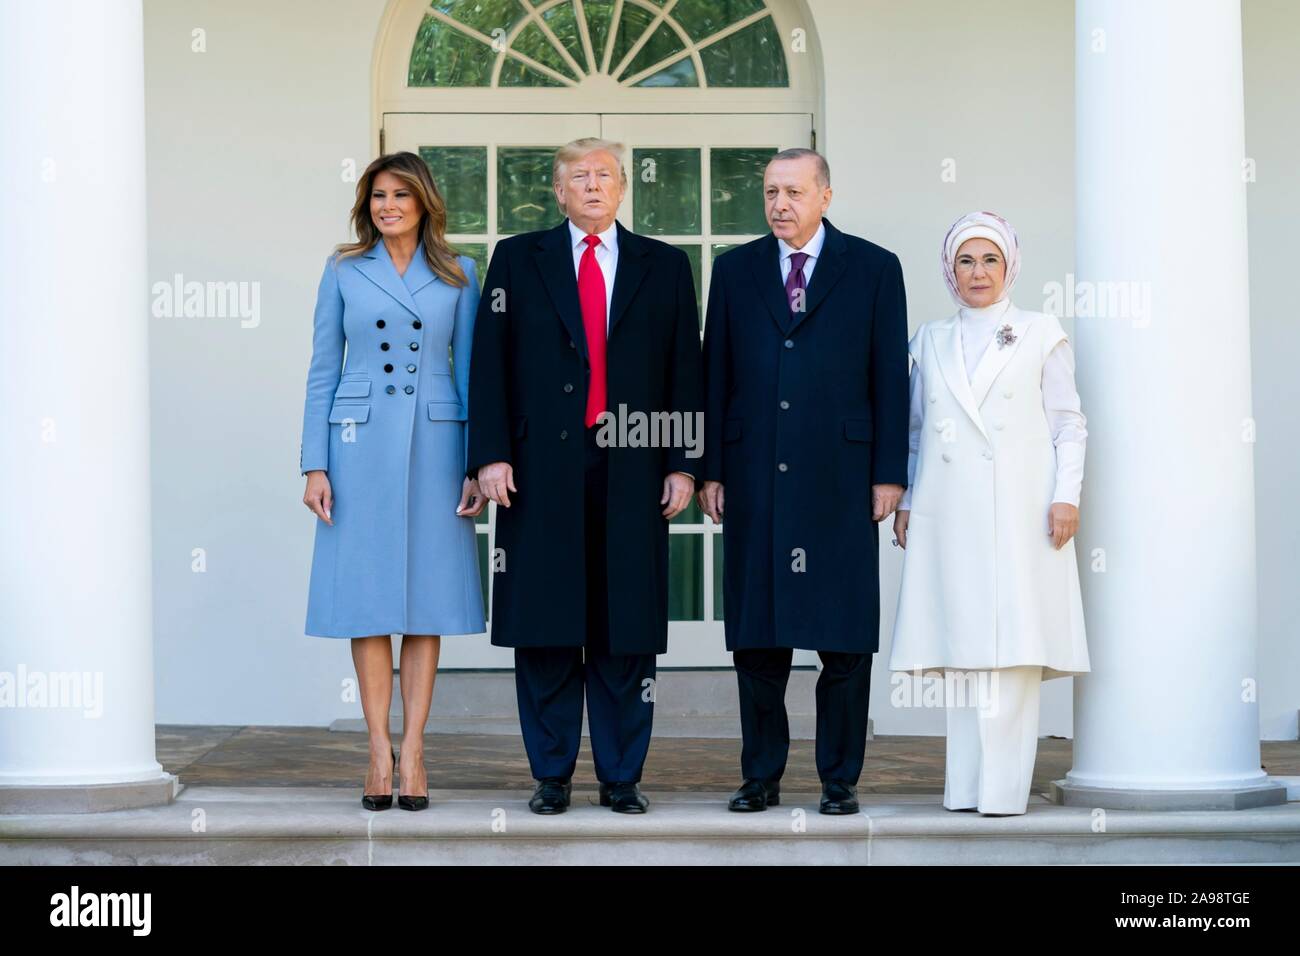 Washington, United States of America. 13 November, 2019. U.S President Donald Trump and First Lady Melania Trump pose with Turkish President Recep Tayyip Erdogan and his wife Emine Erdogan on the West Colonnade of the White House November 13, 2019 in Washington, DC.  Credit: Andrea Hanks/White House Photo/Alamy Live News Stock Photo